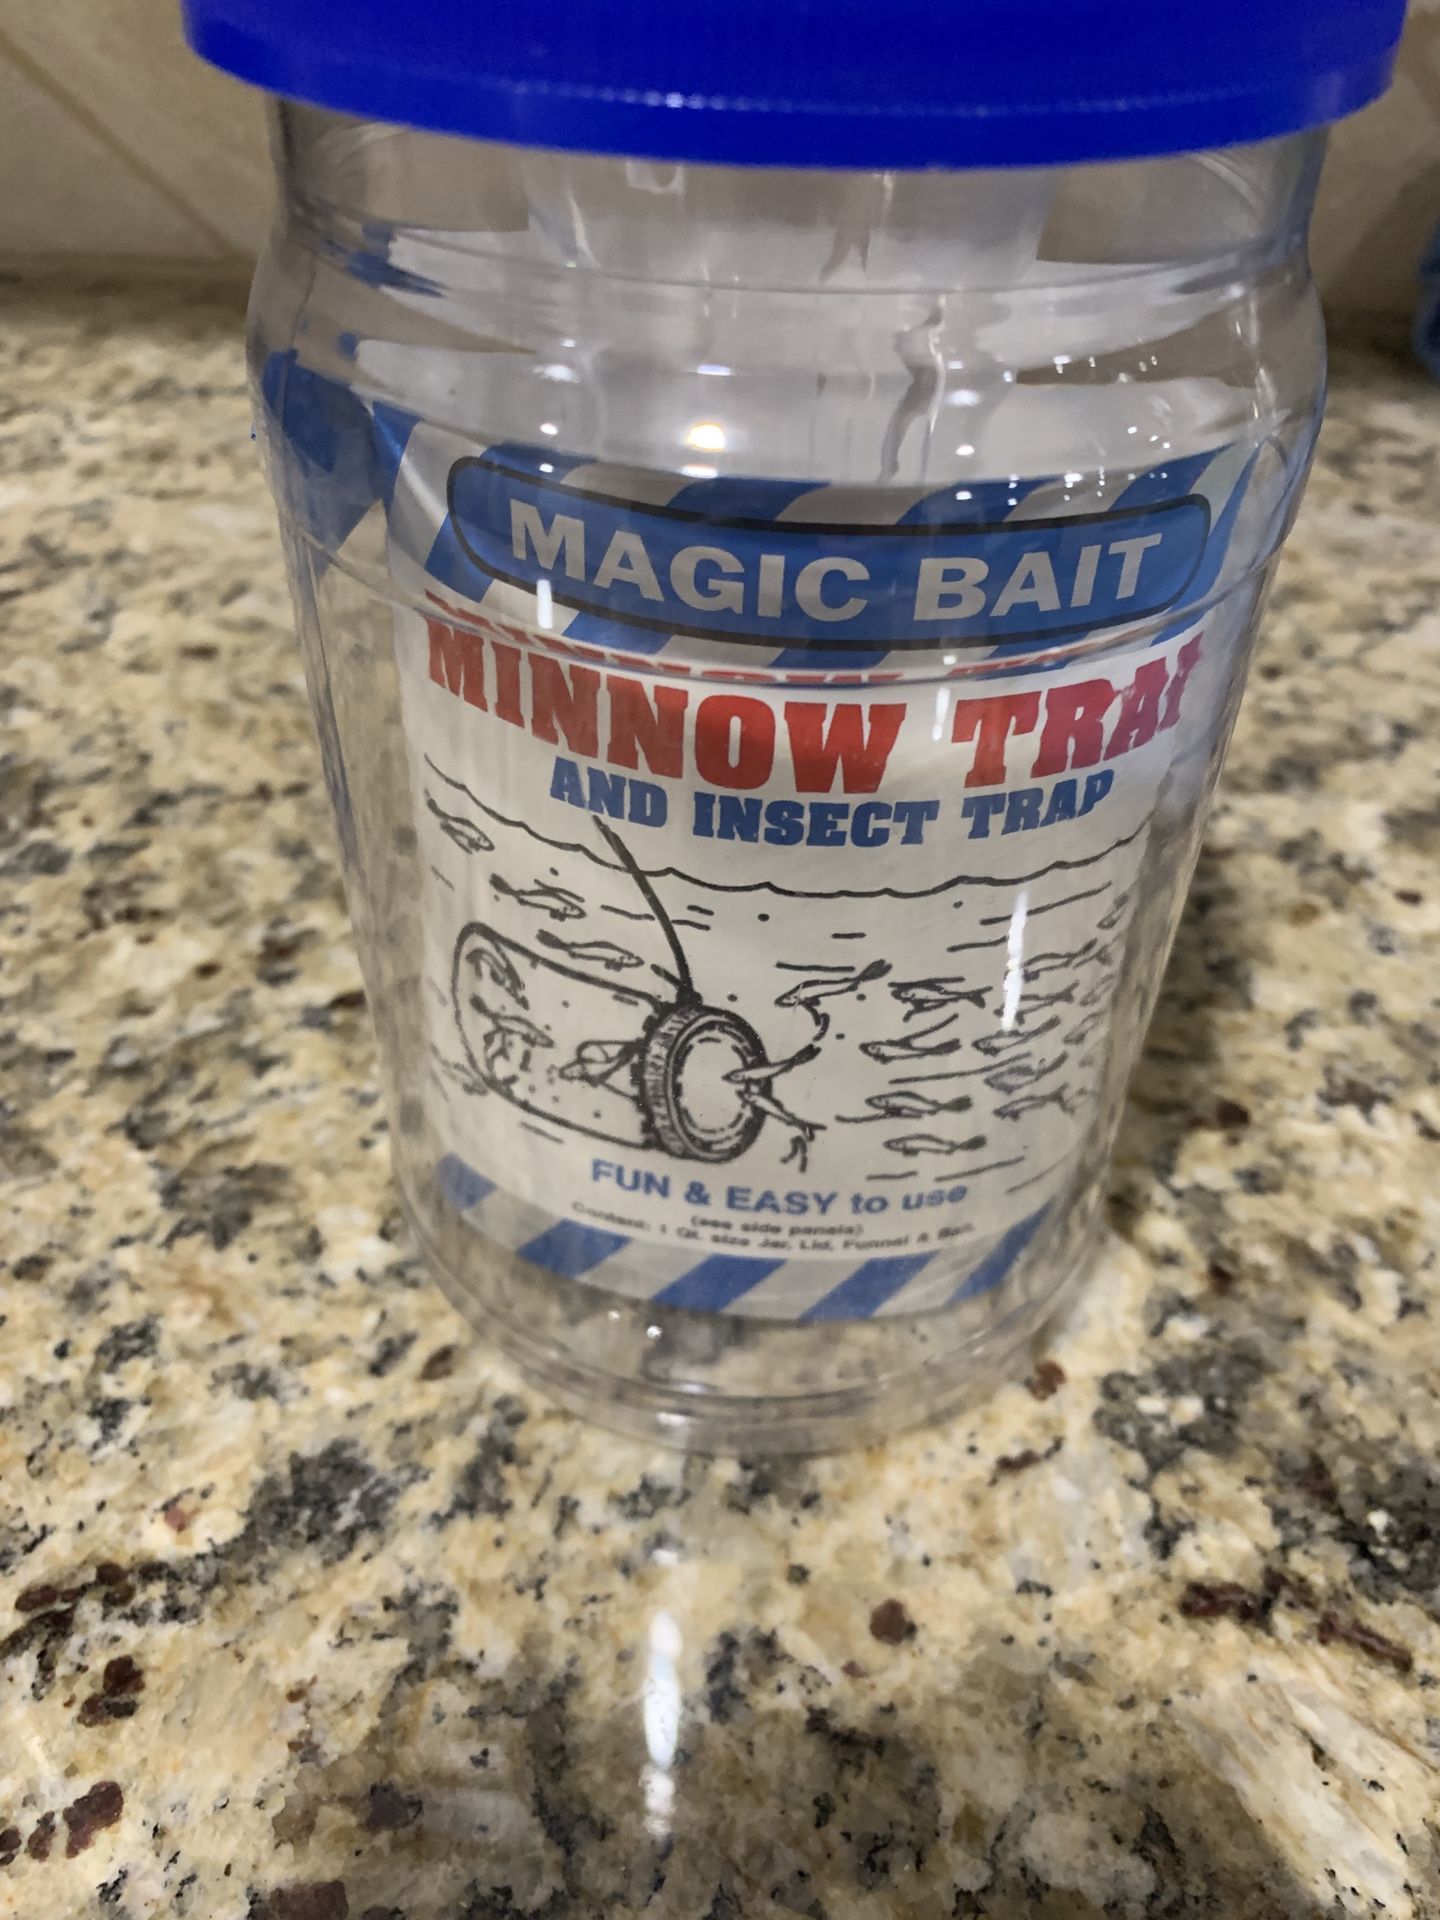 2 Magic Bait Minnow Trap and Insect Trap